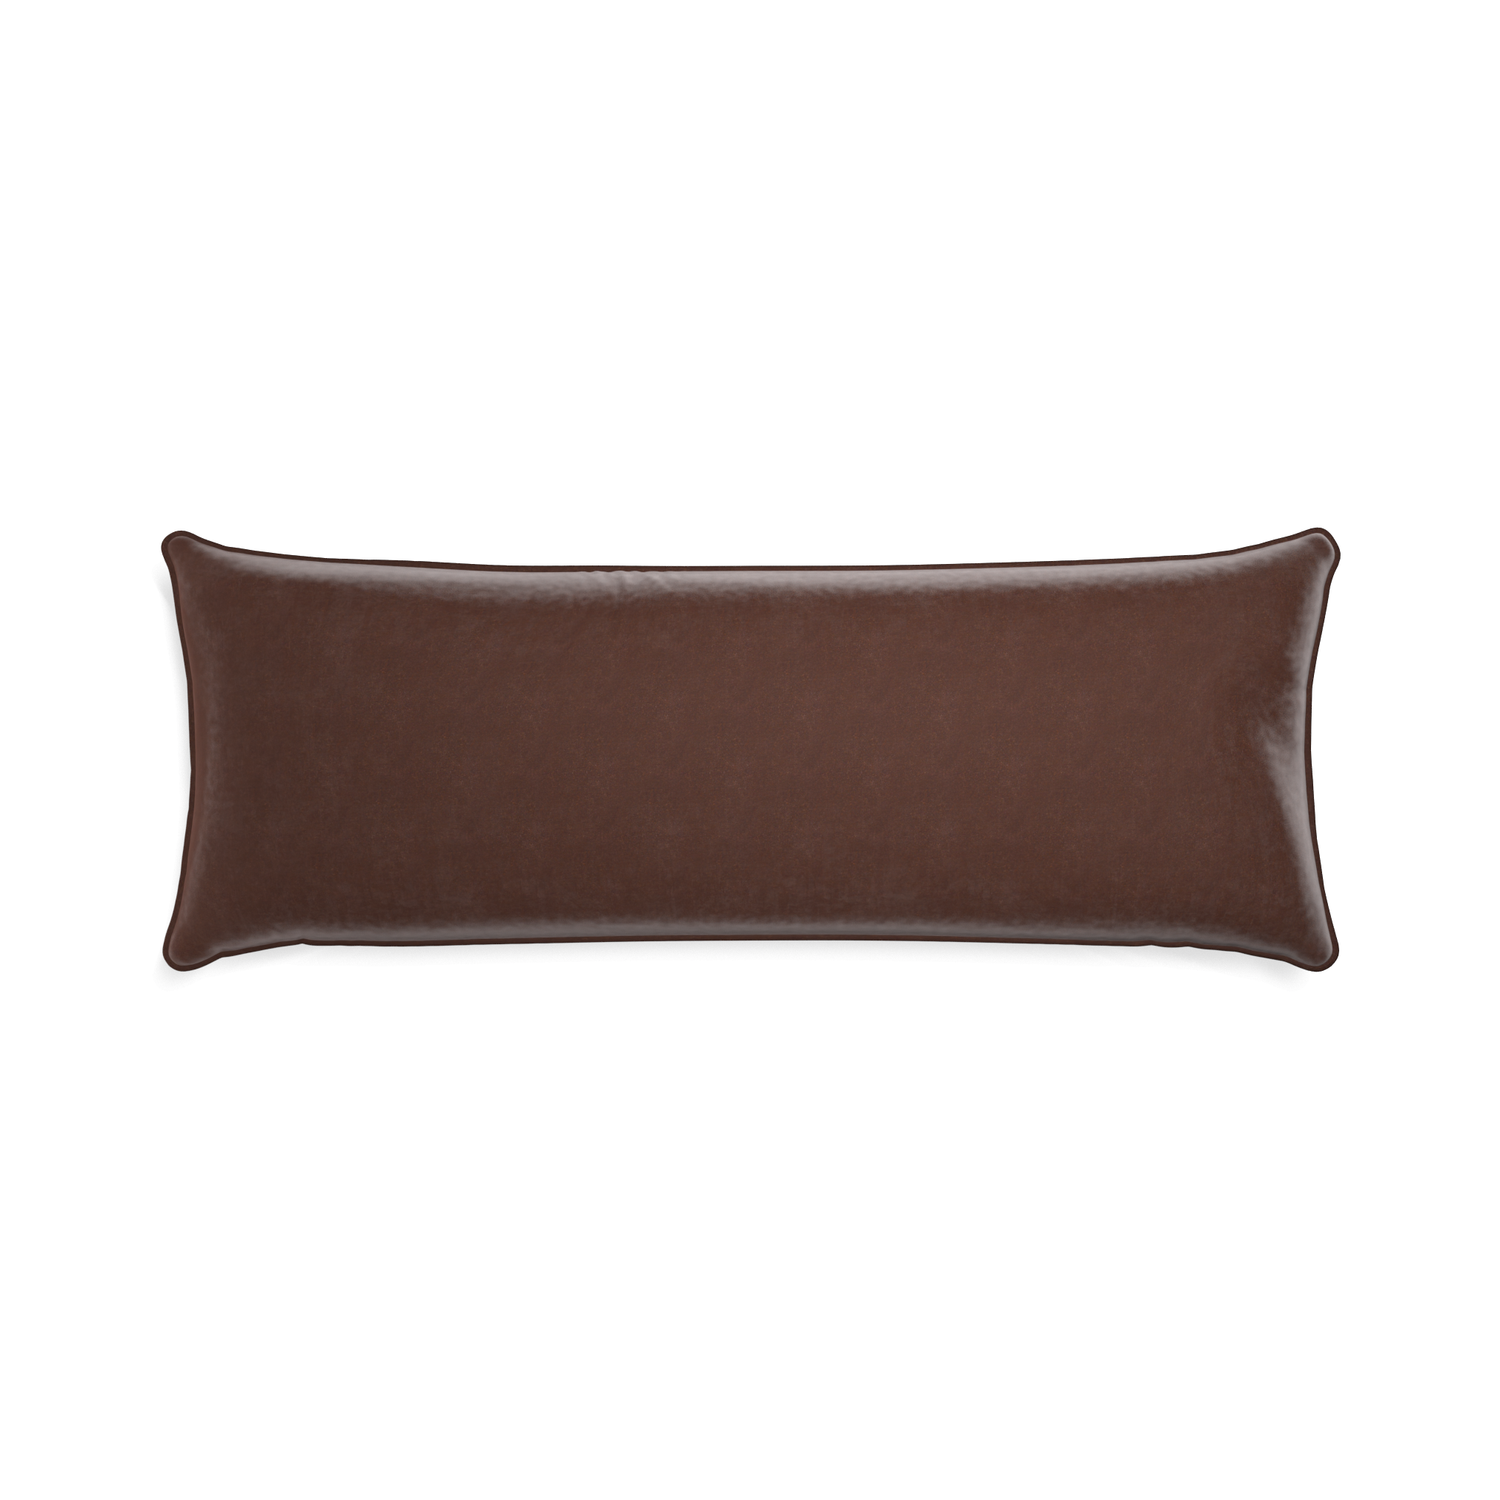 rectangle brown velvet pillow with brown piping